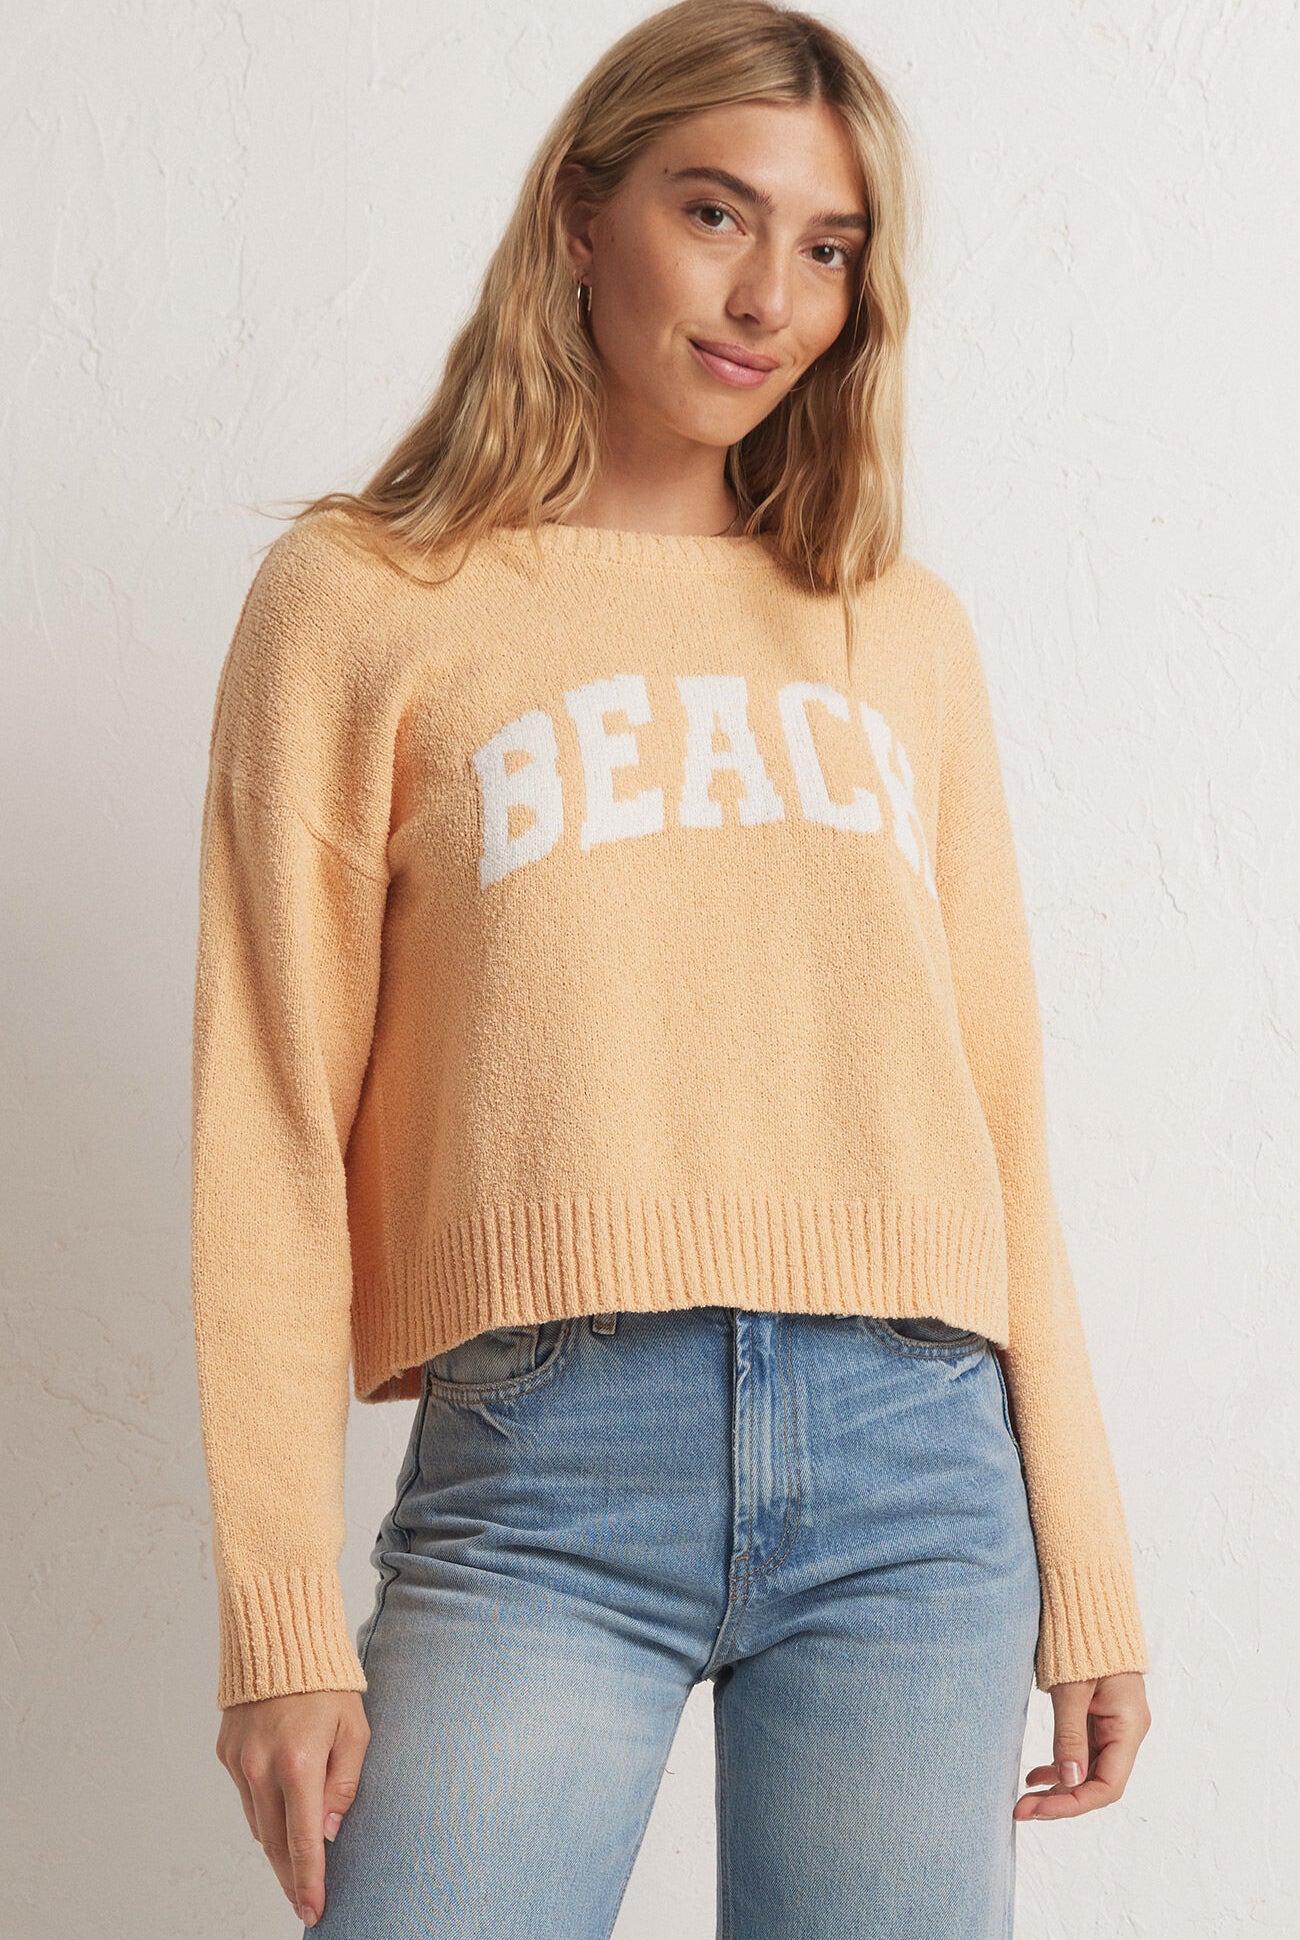 Beach Sweater-Sweaters-Vixen Collection, Day Spa and Women's Boutique Located in Seattle, Washington